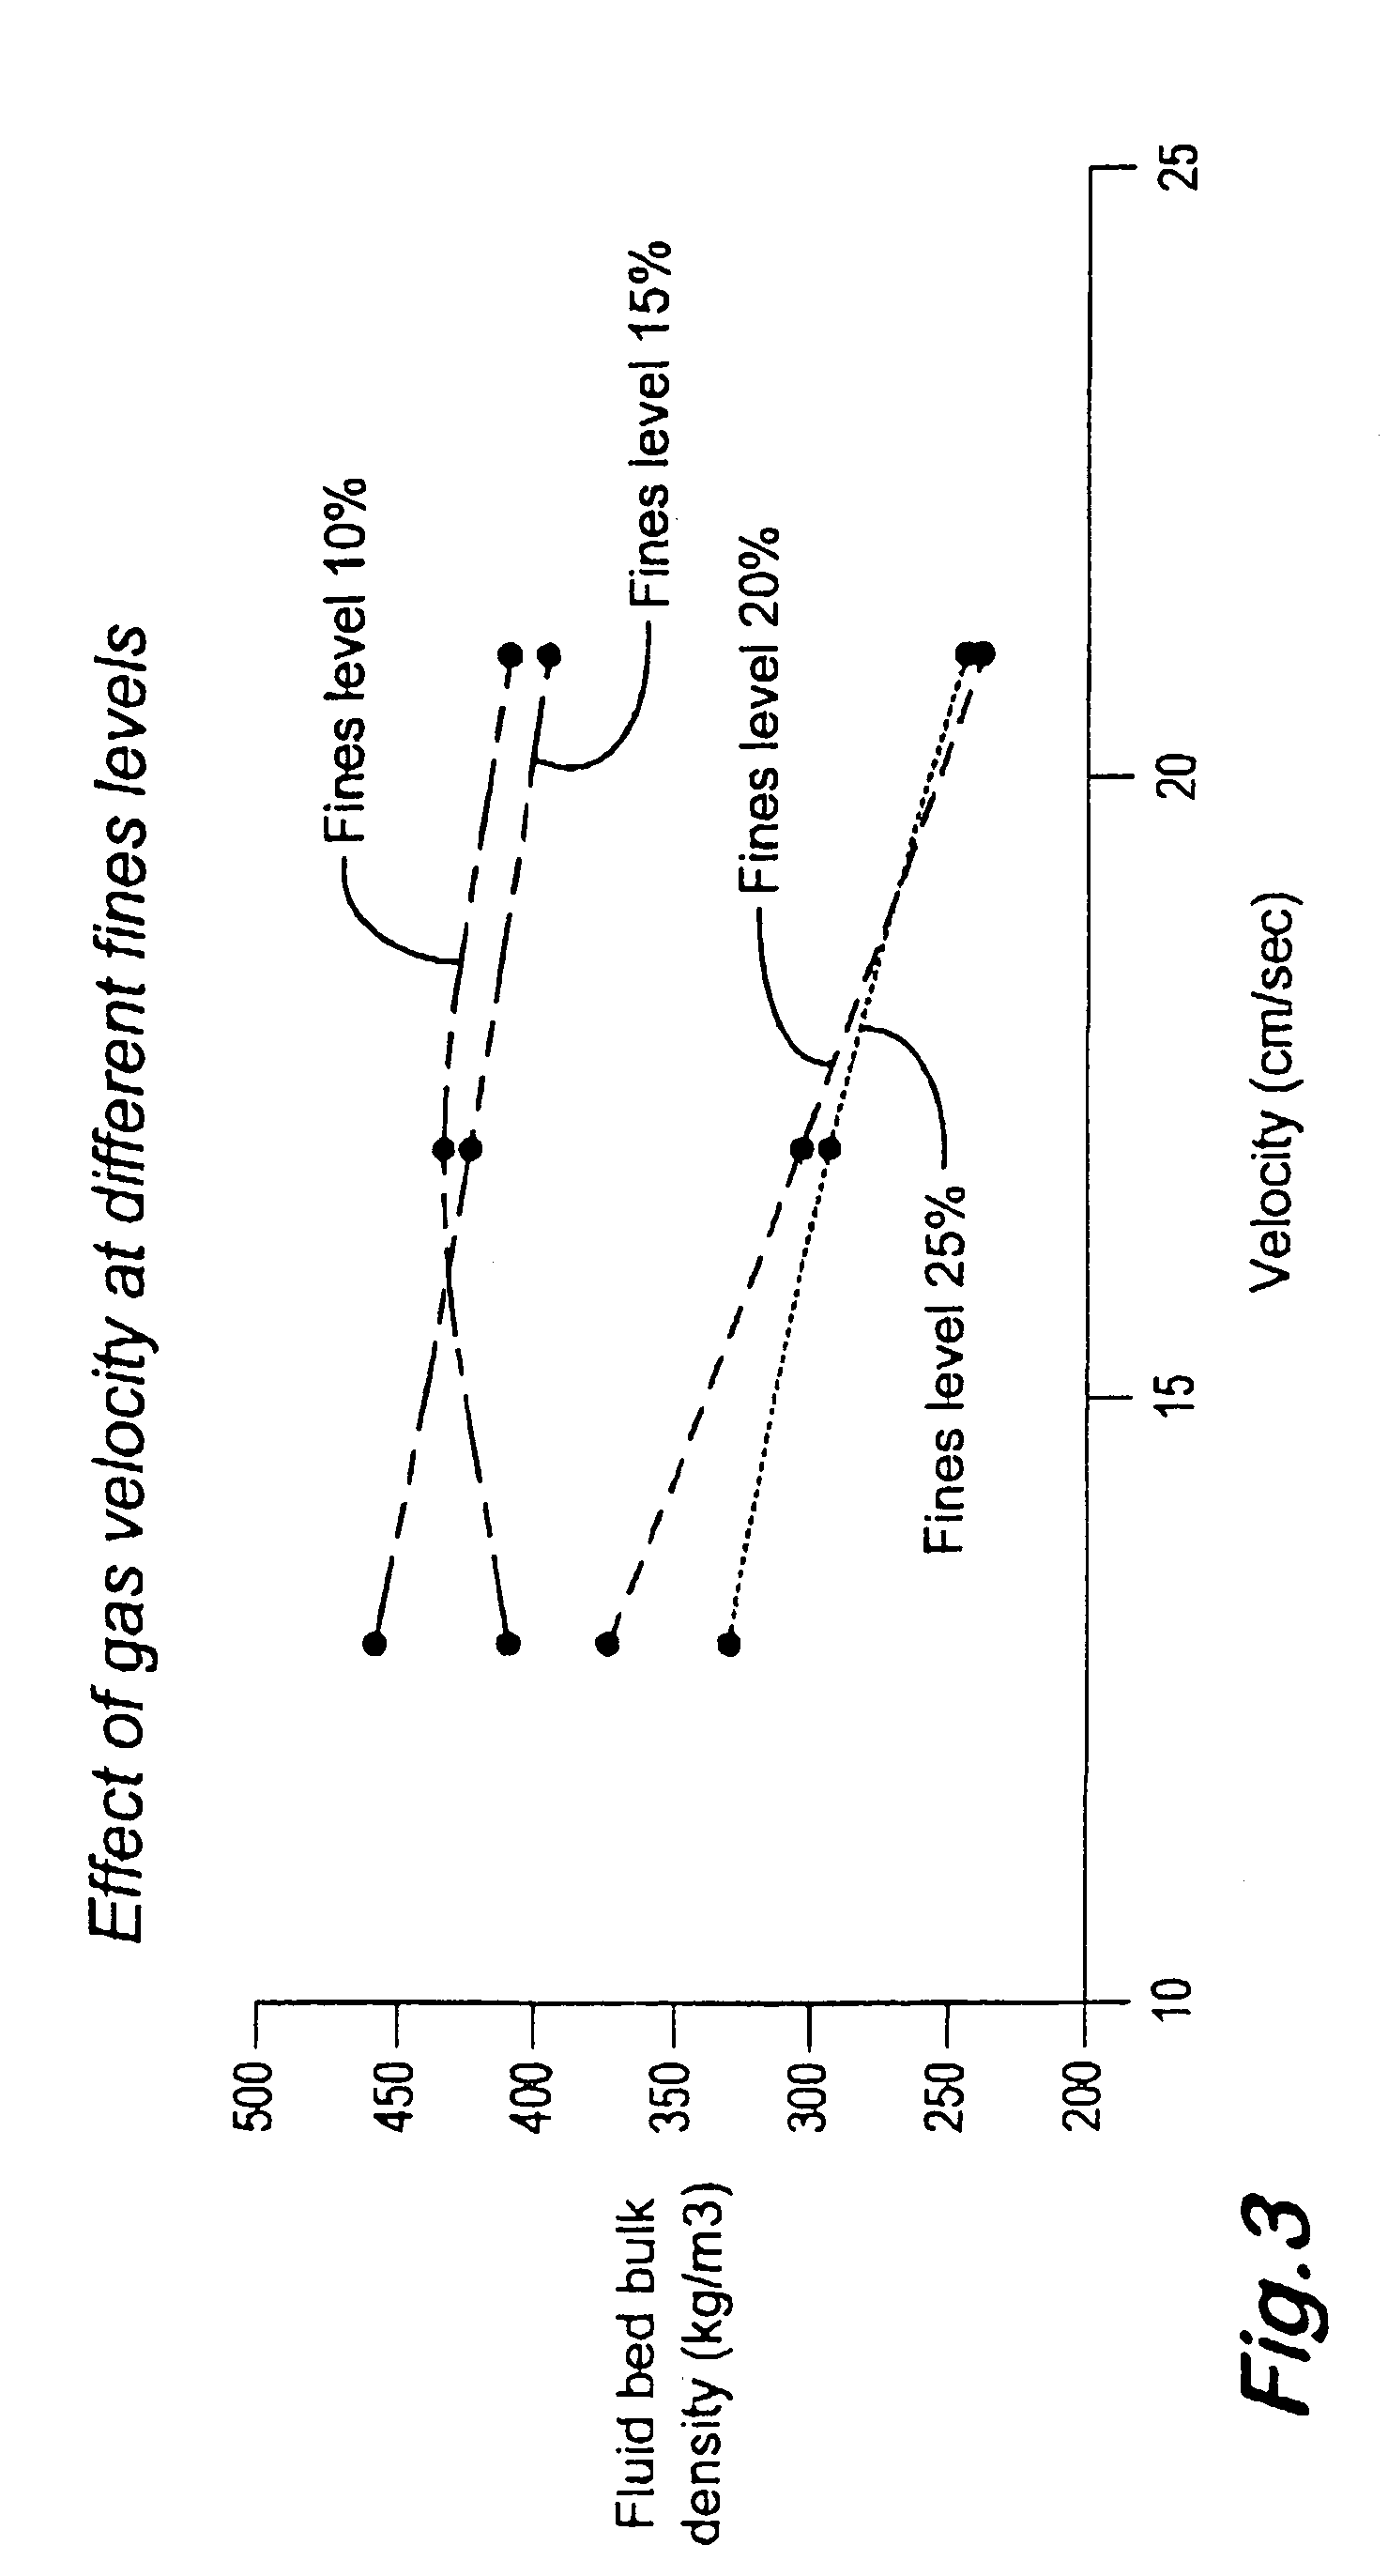 Oxidation process in fluidized bed reactor